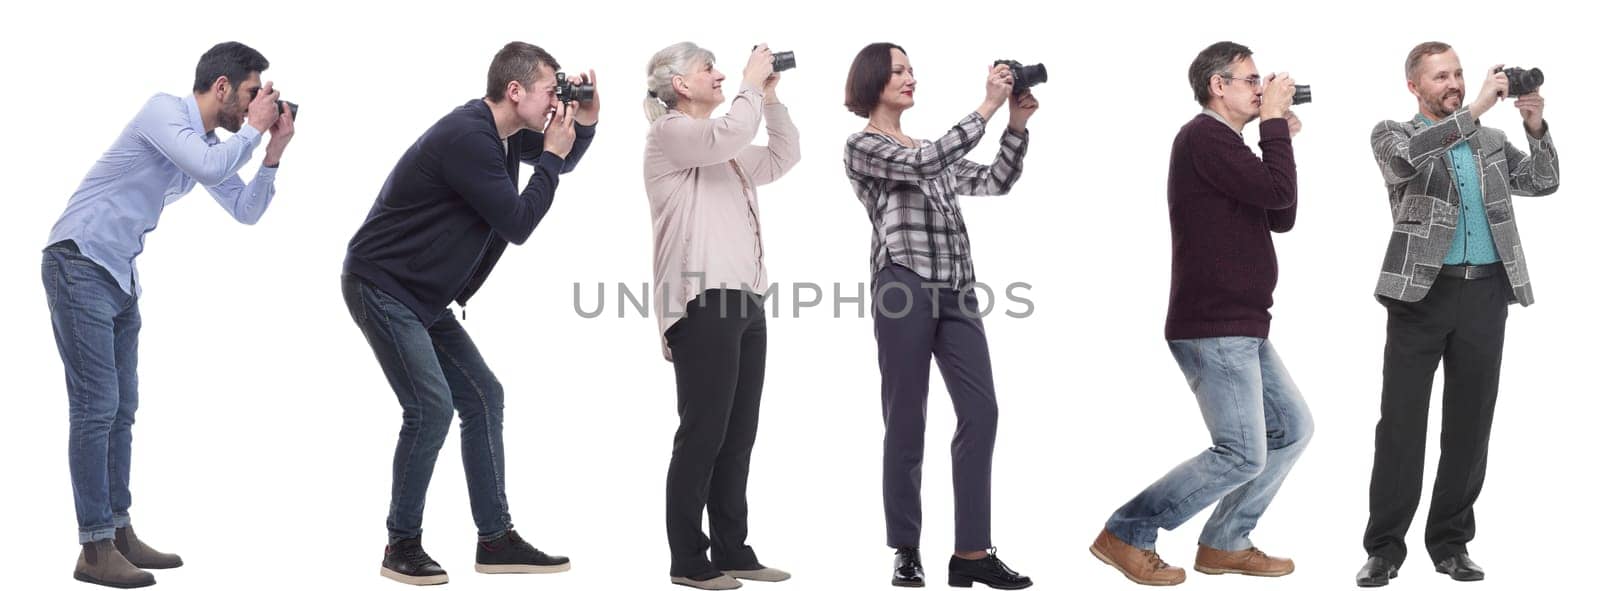 collage of group of photographers in profile isolated on white background